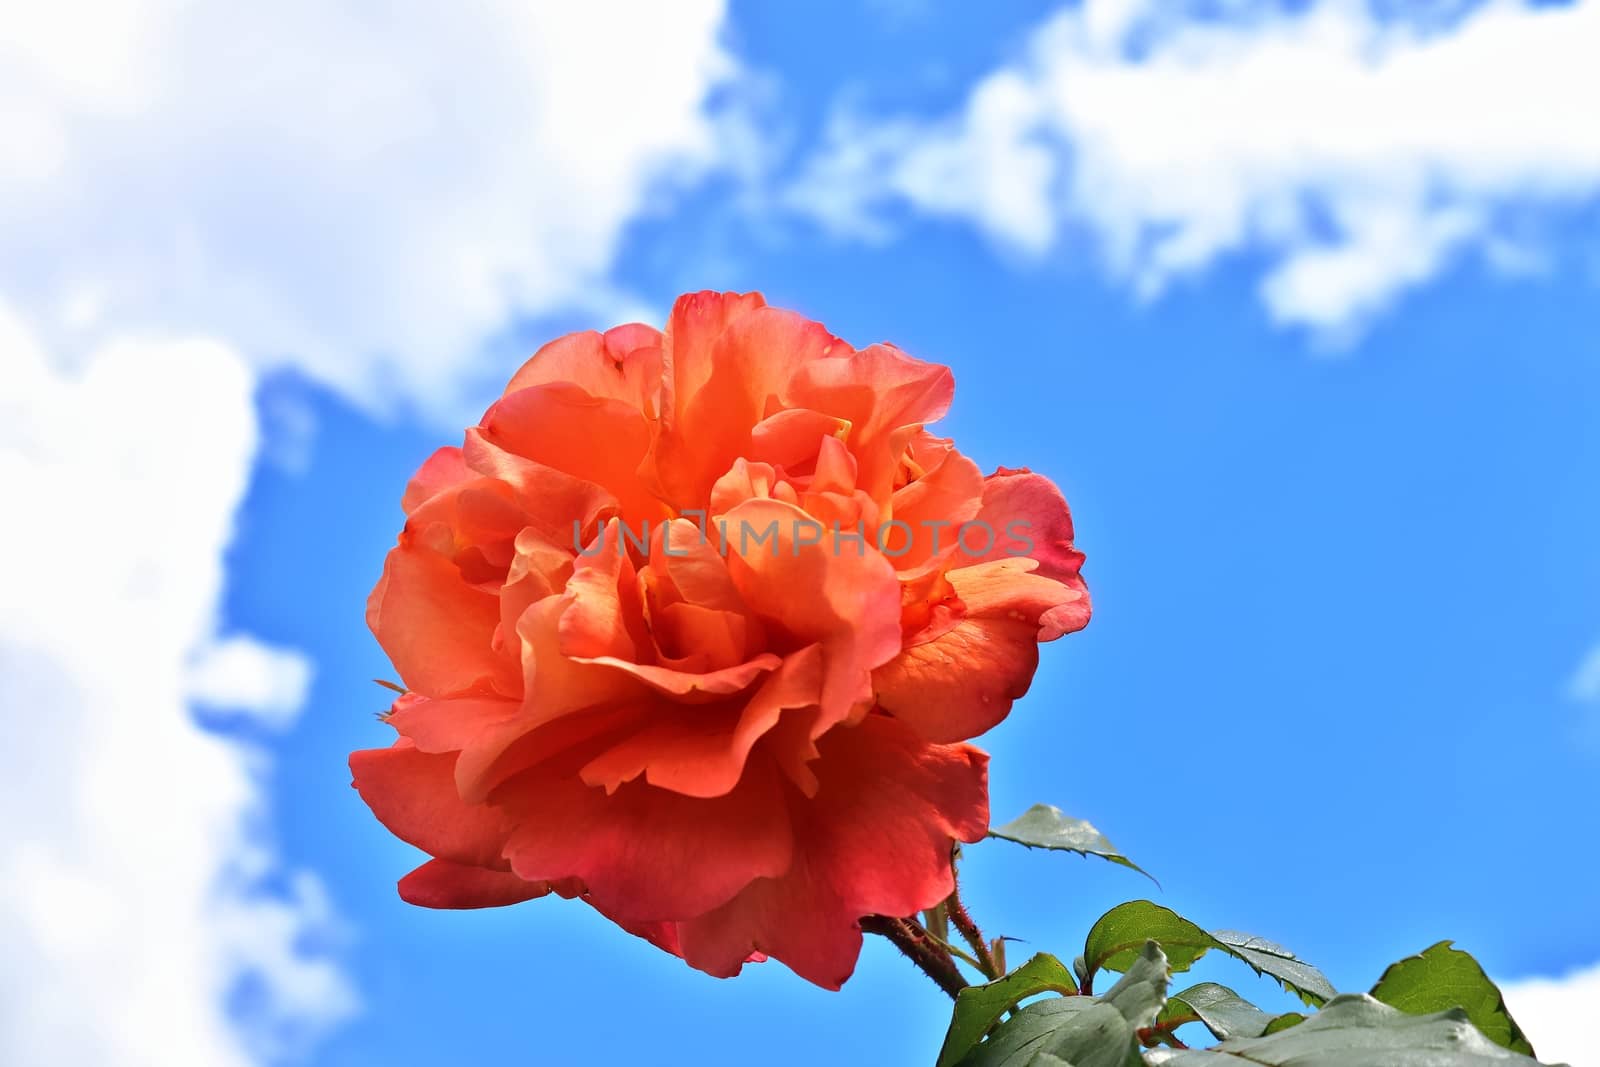 Top view of yellow and orange rose flower in a roses garden with by MP_foto71